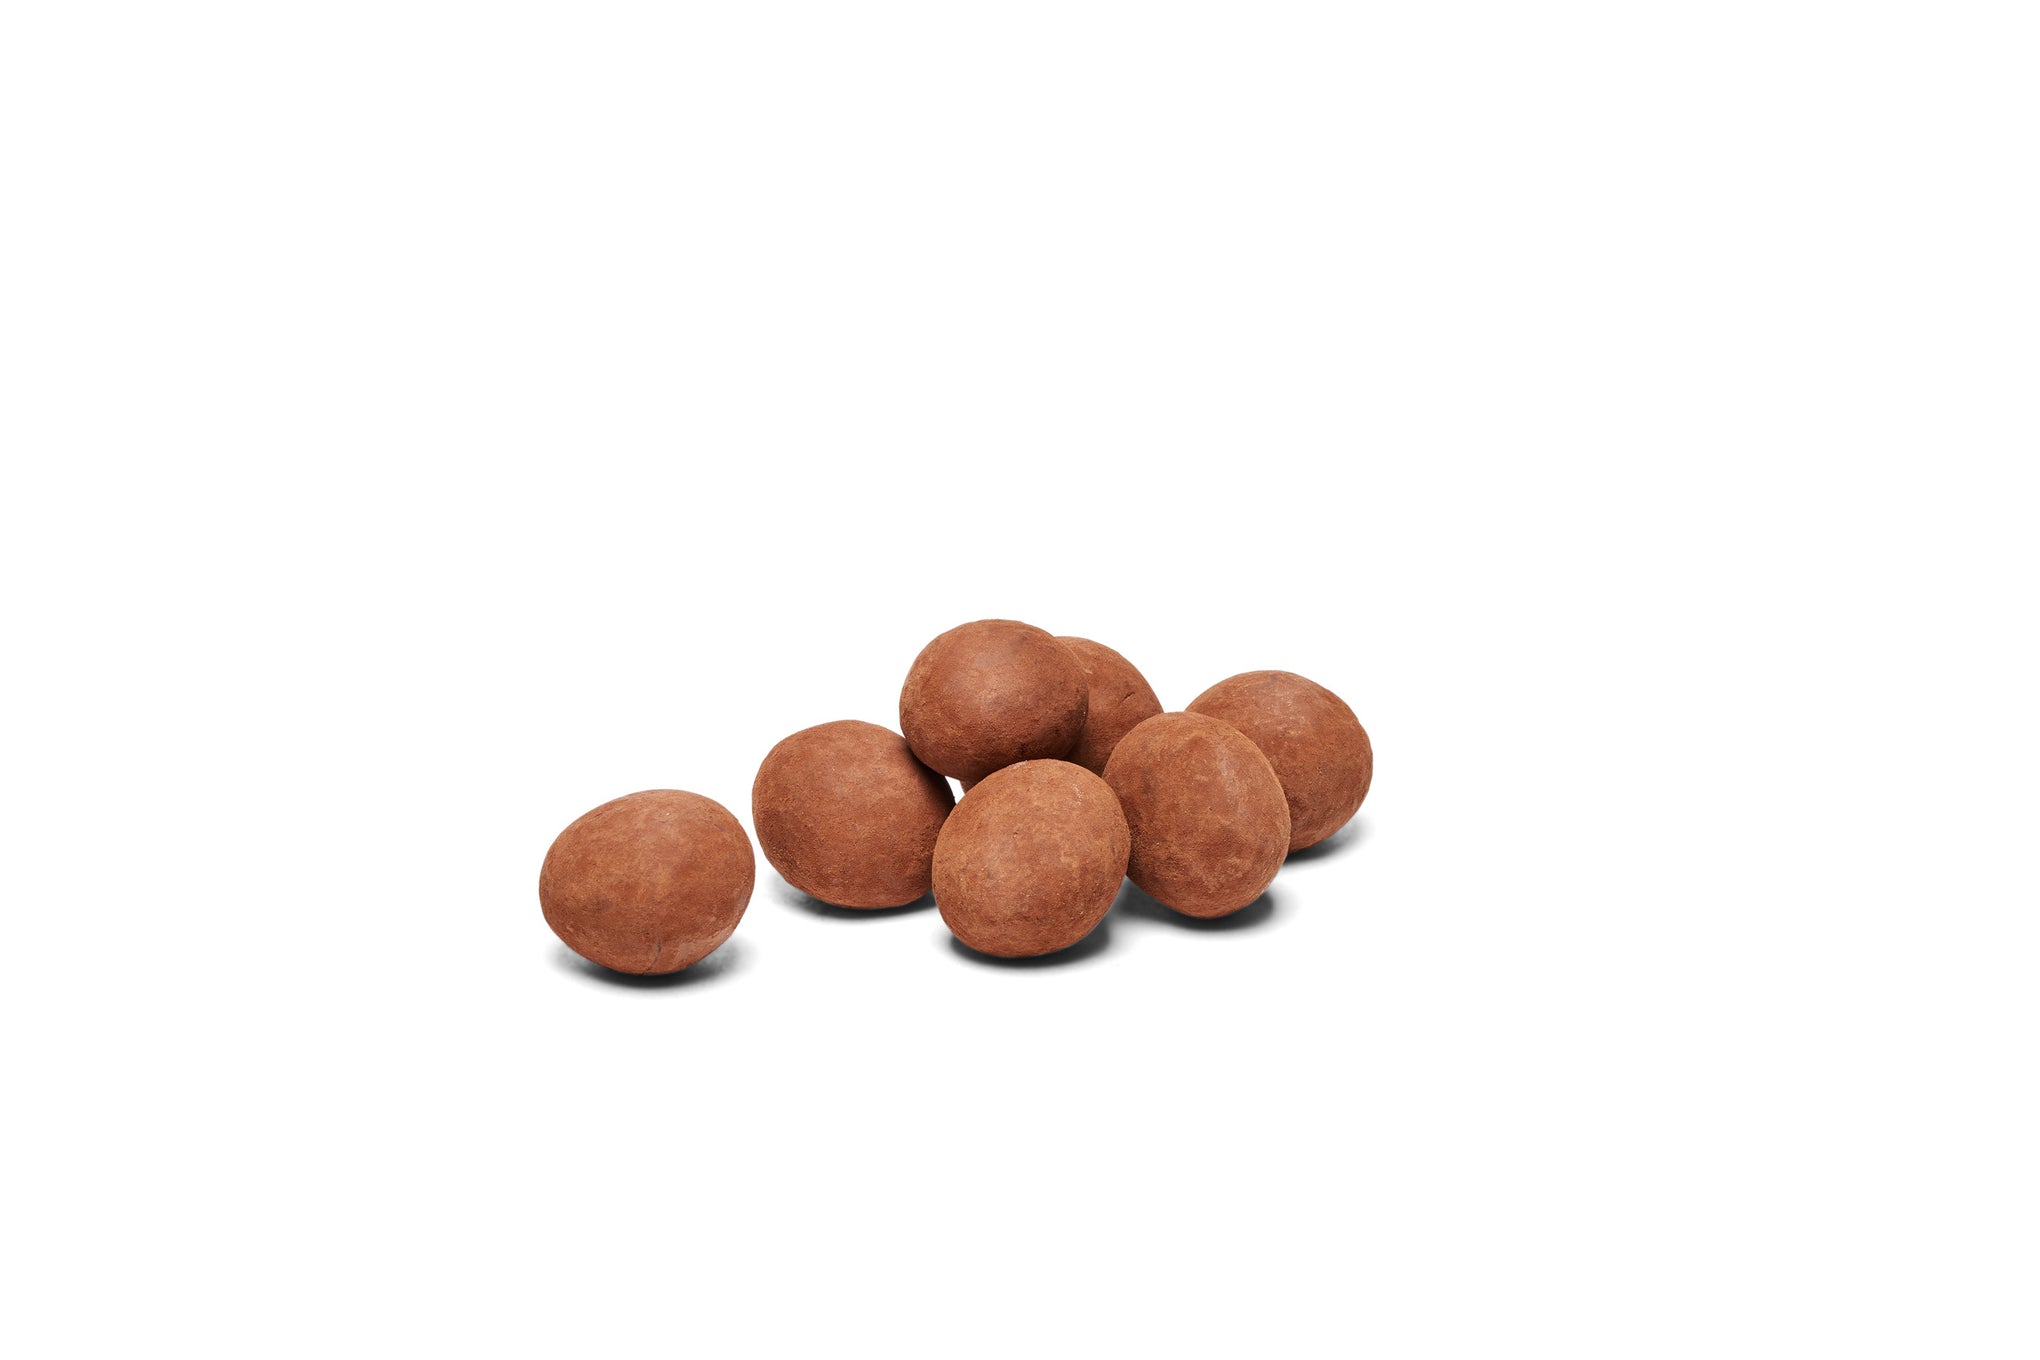 Dusted chocolate macadamias placed together